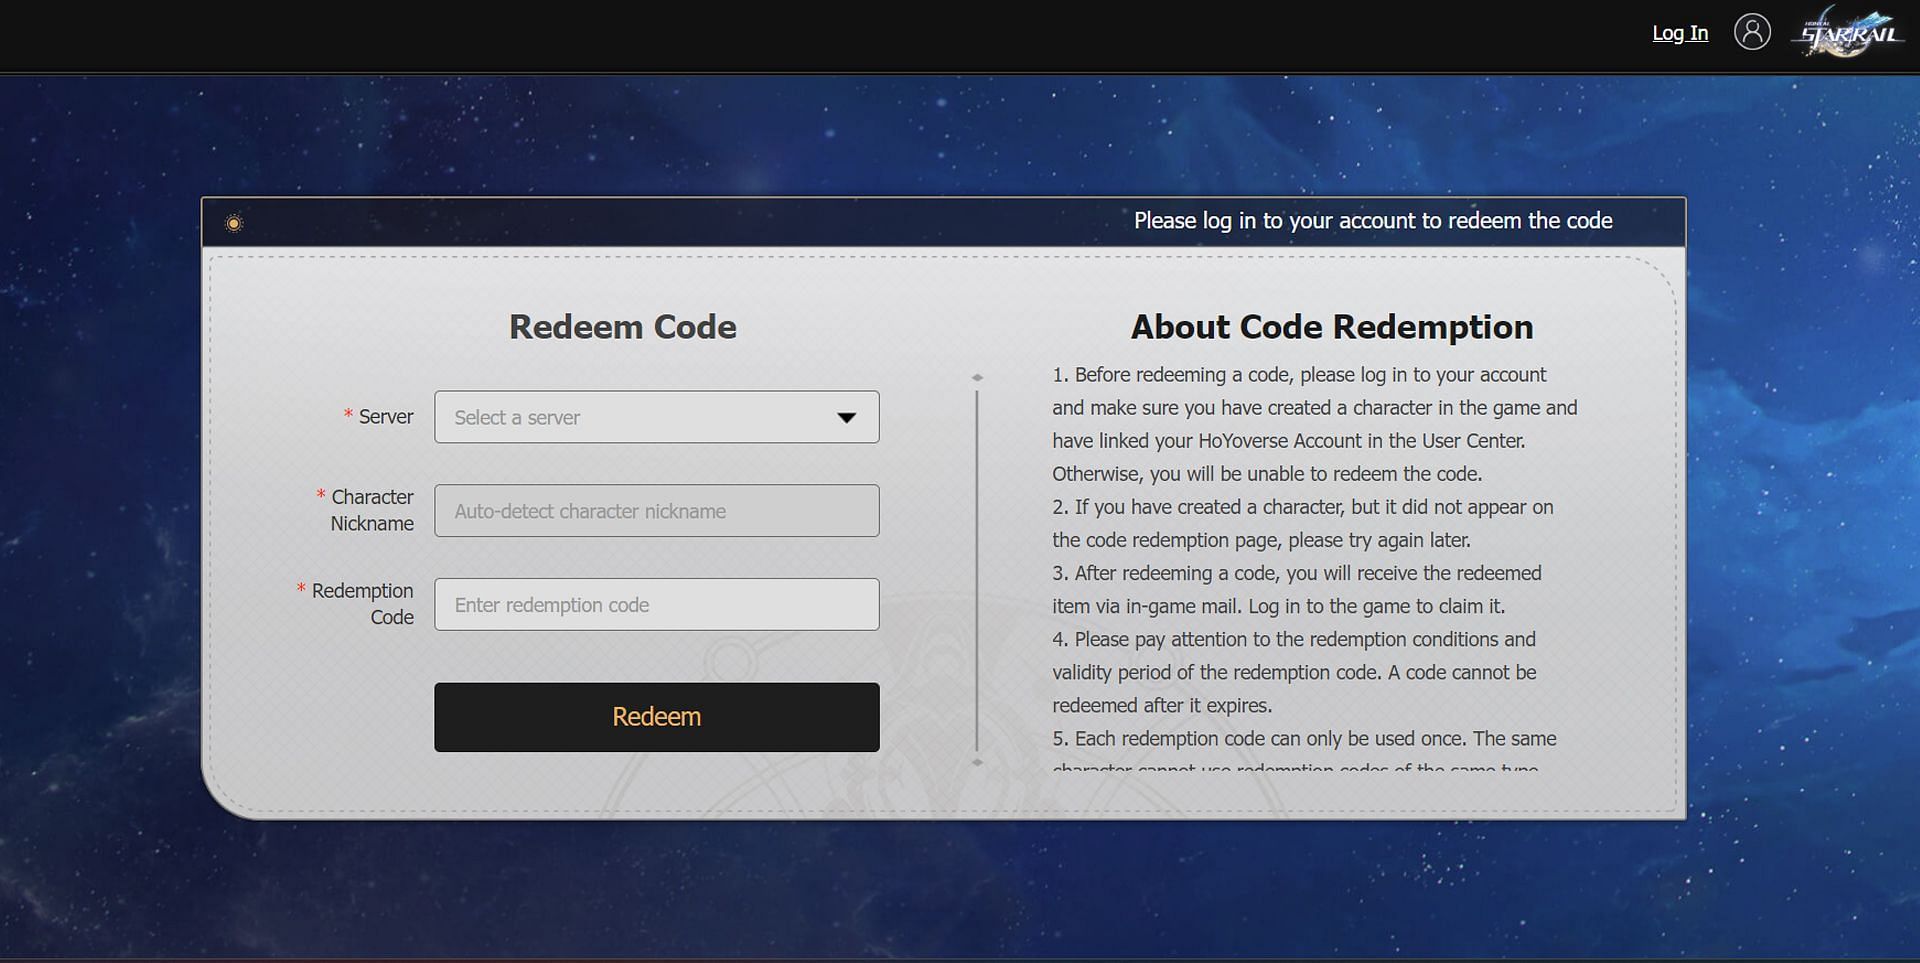 How to redeem codes on the website? (Image via HoYoverse)